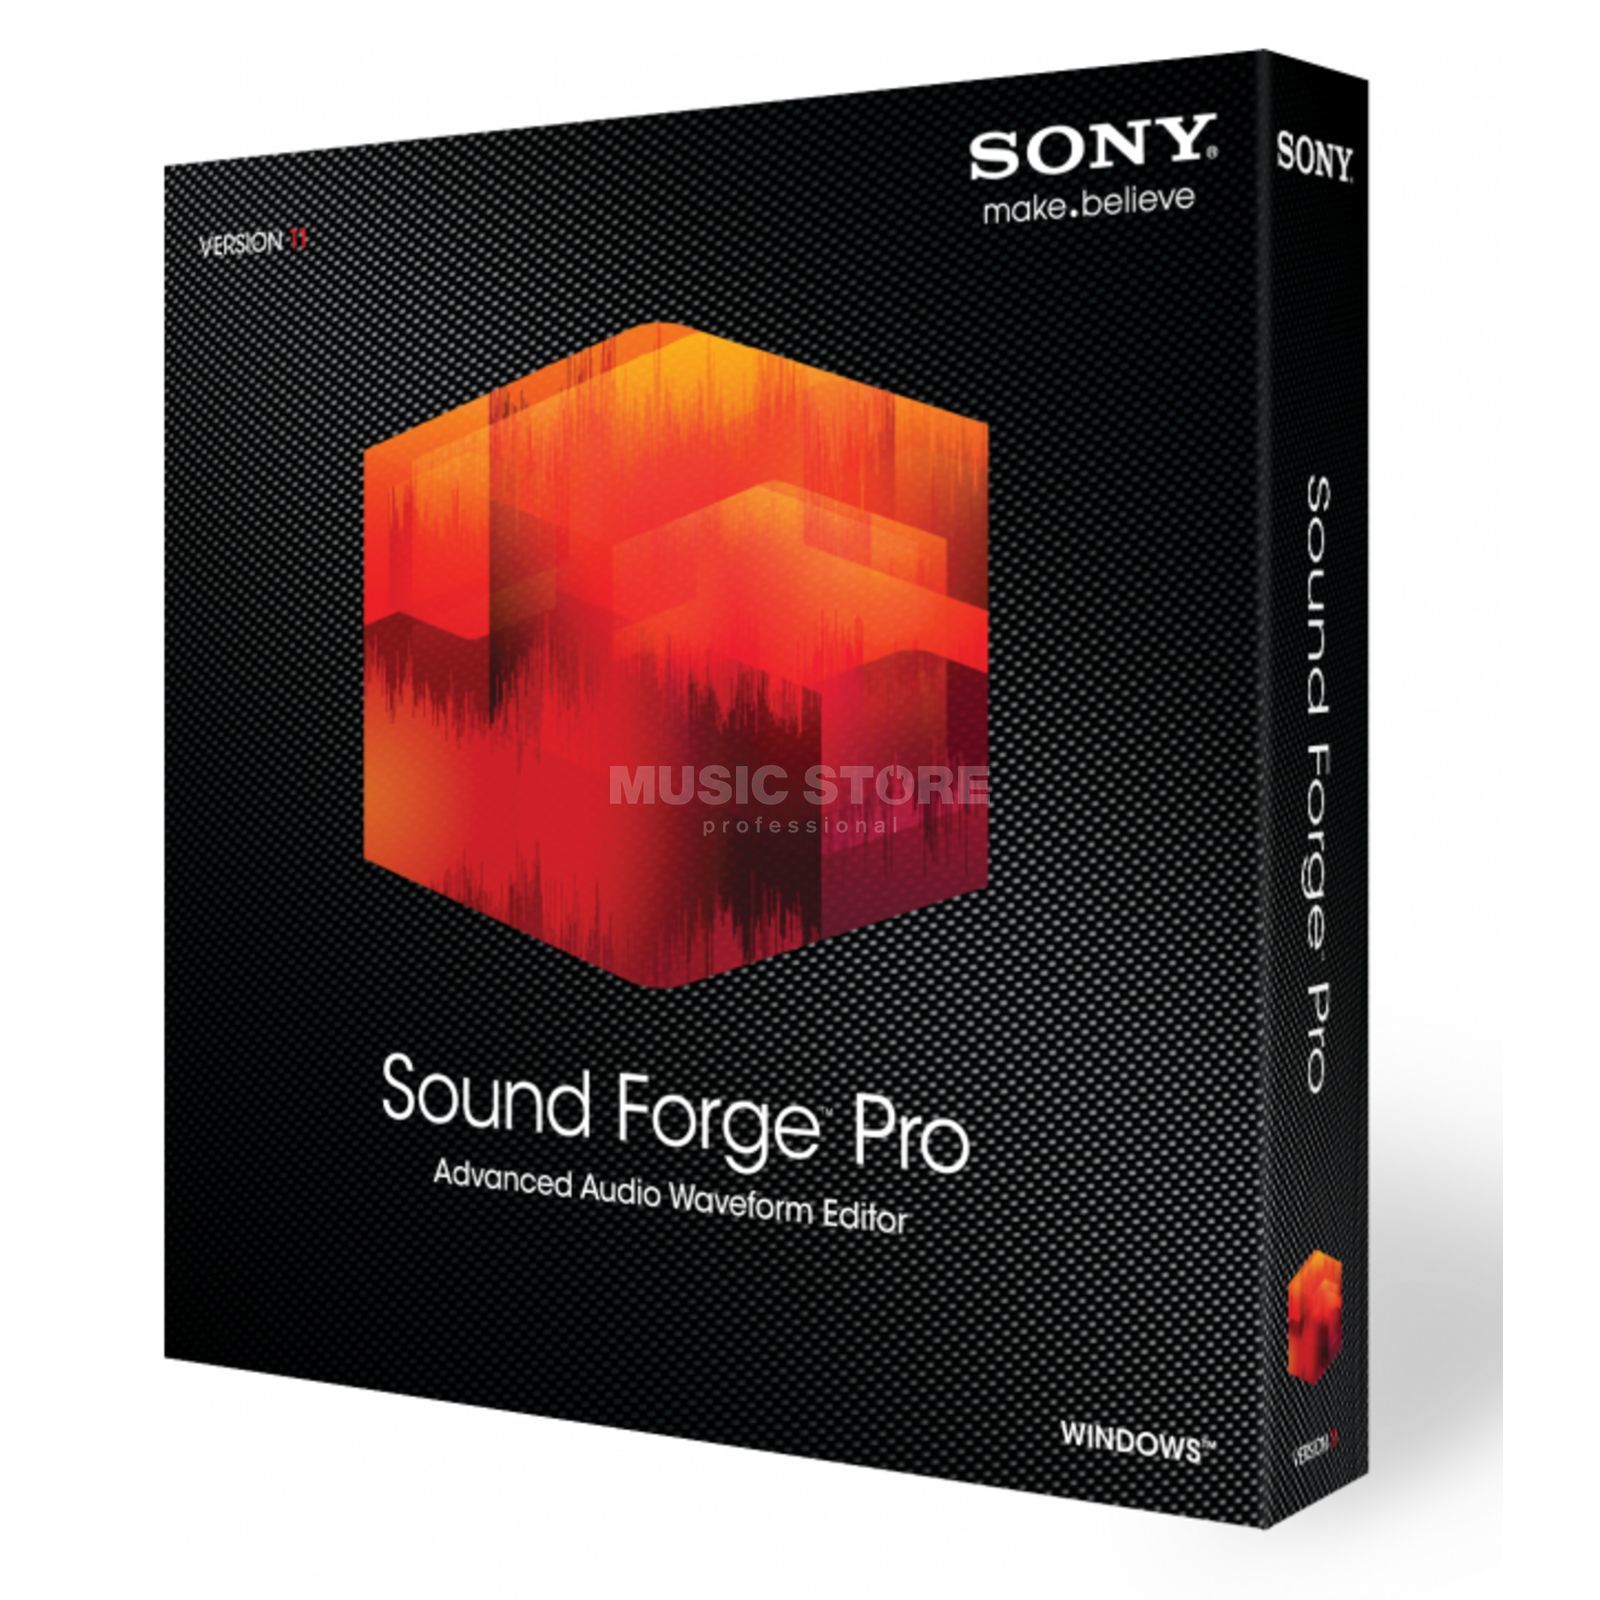 sony sound forge 9.0 free download full version